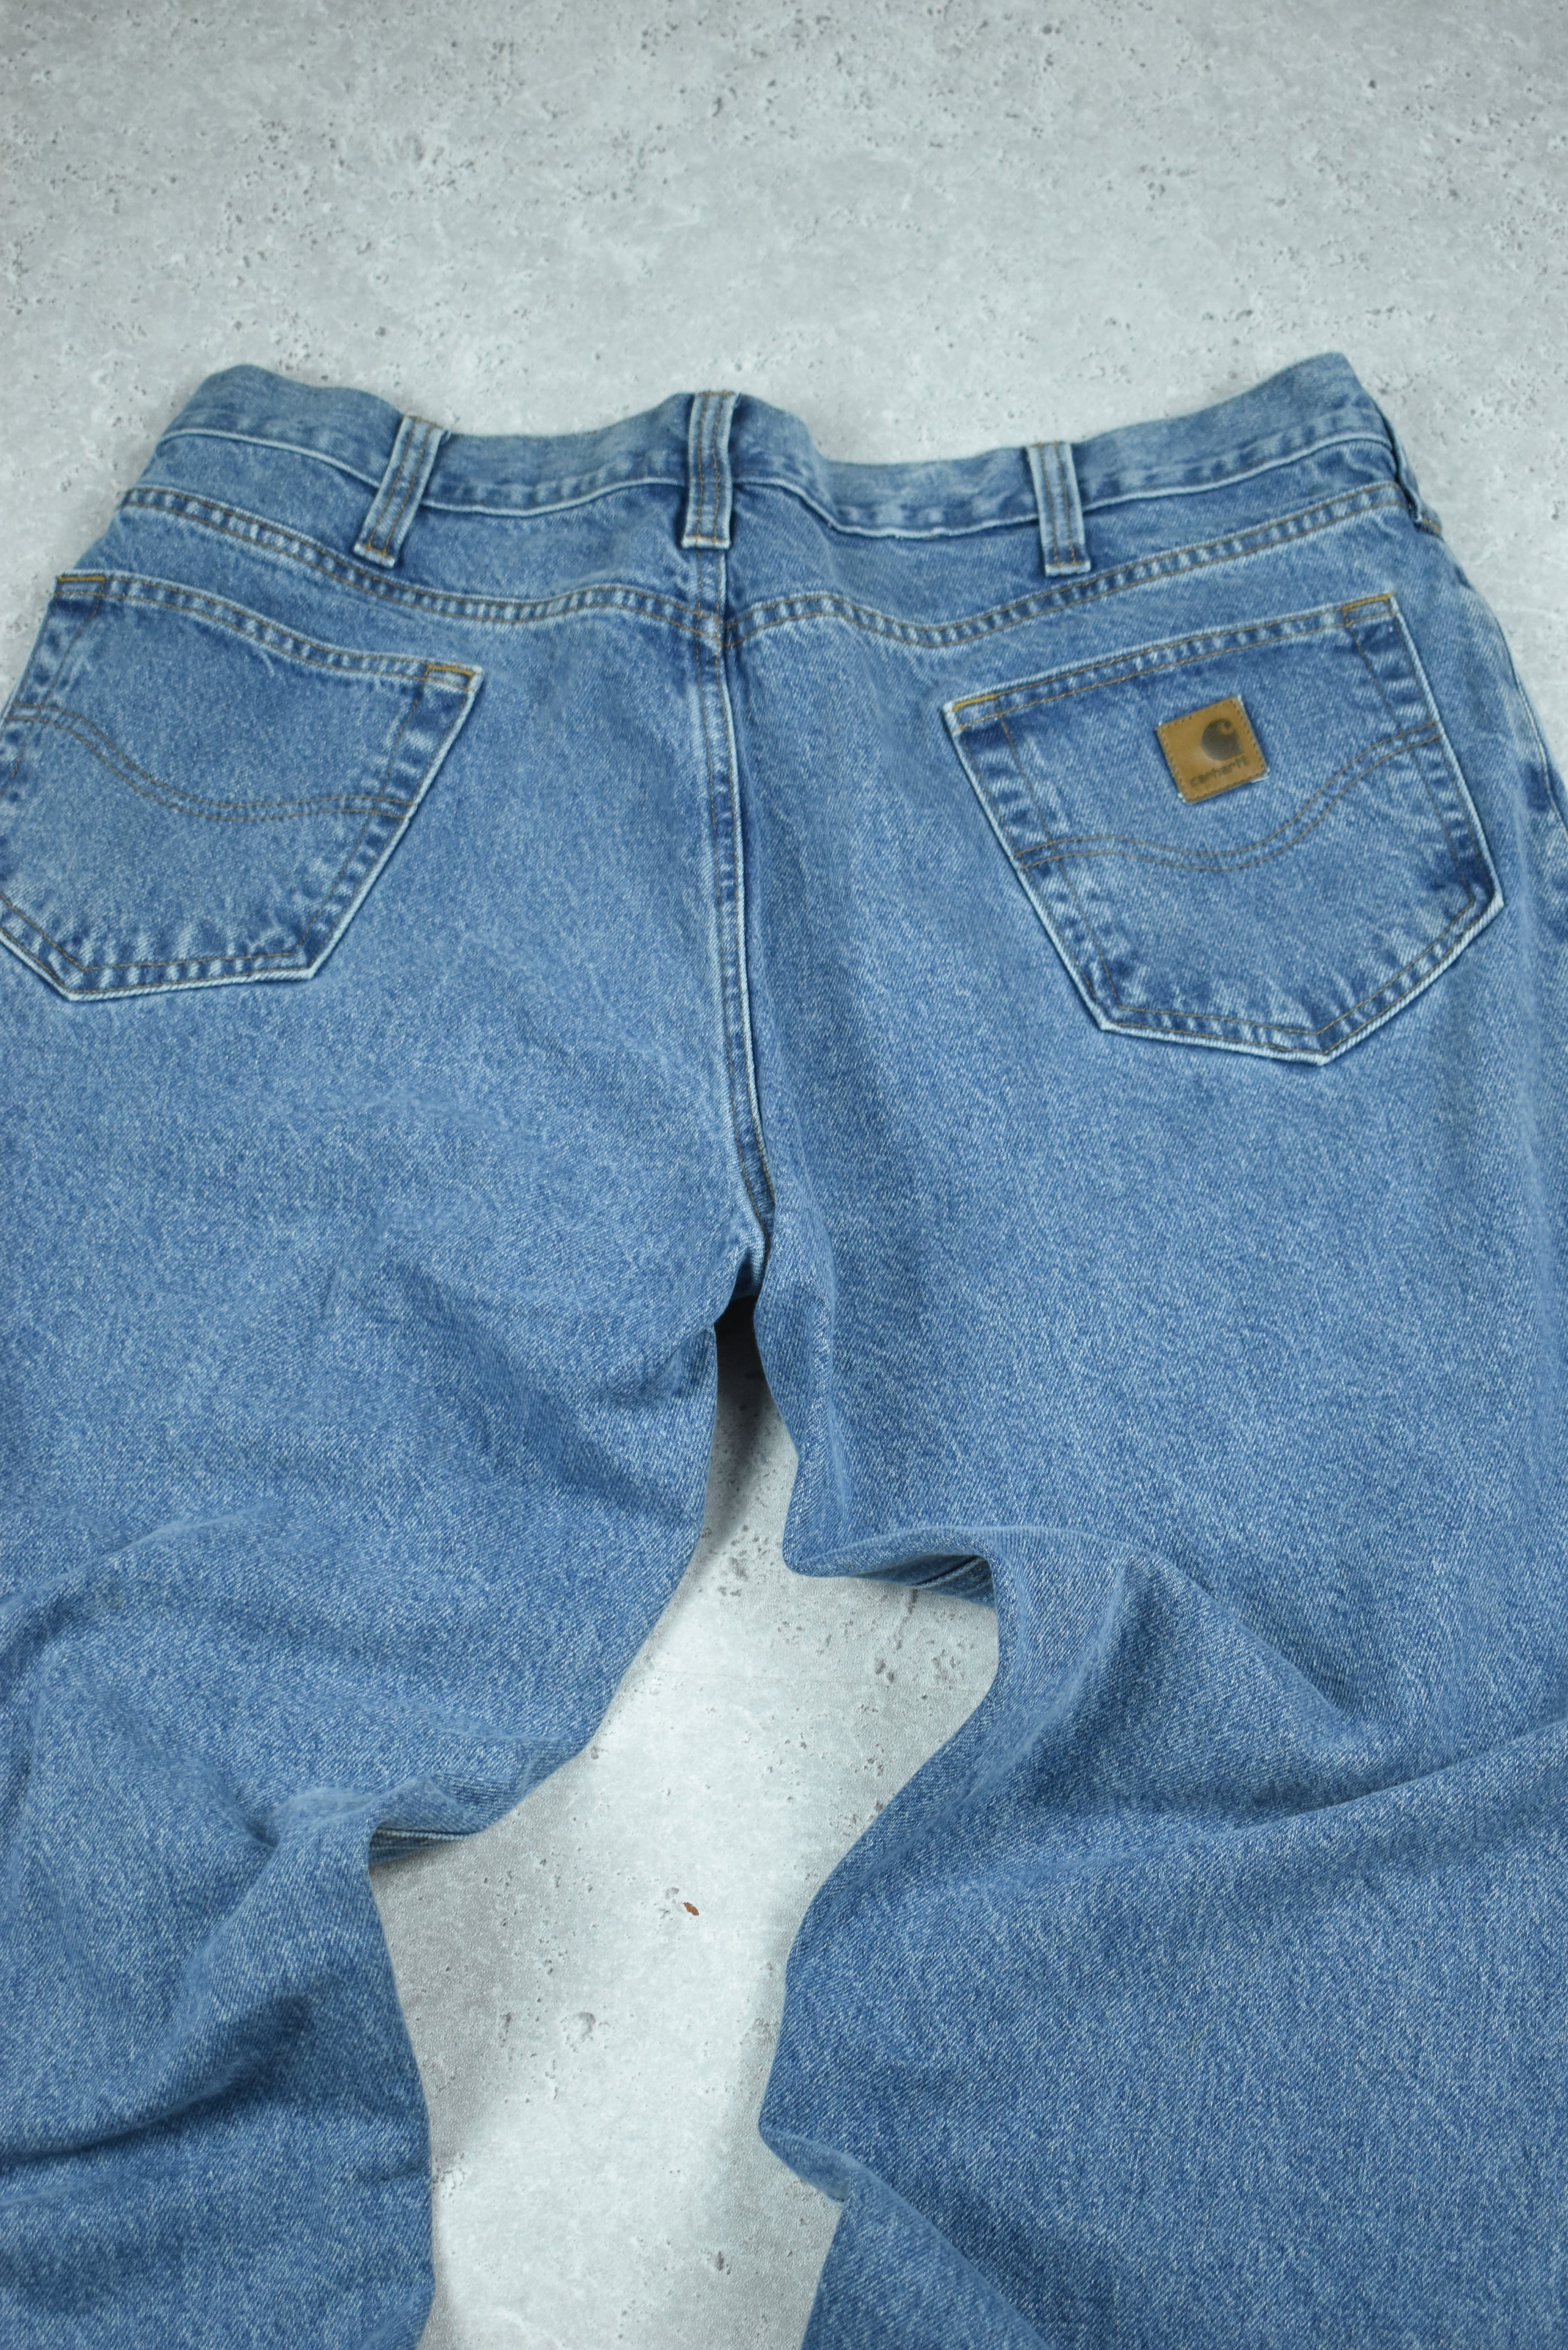 Vintage Carhartt Relaxed Fit Denim Jeans 38x32